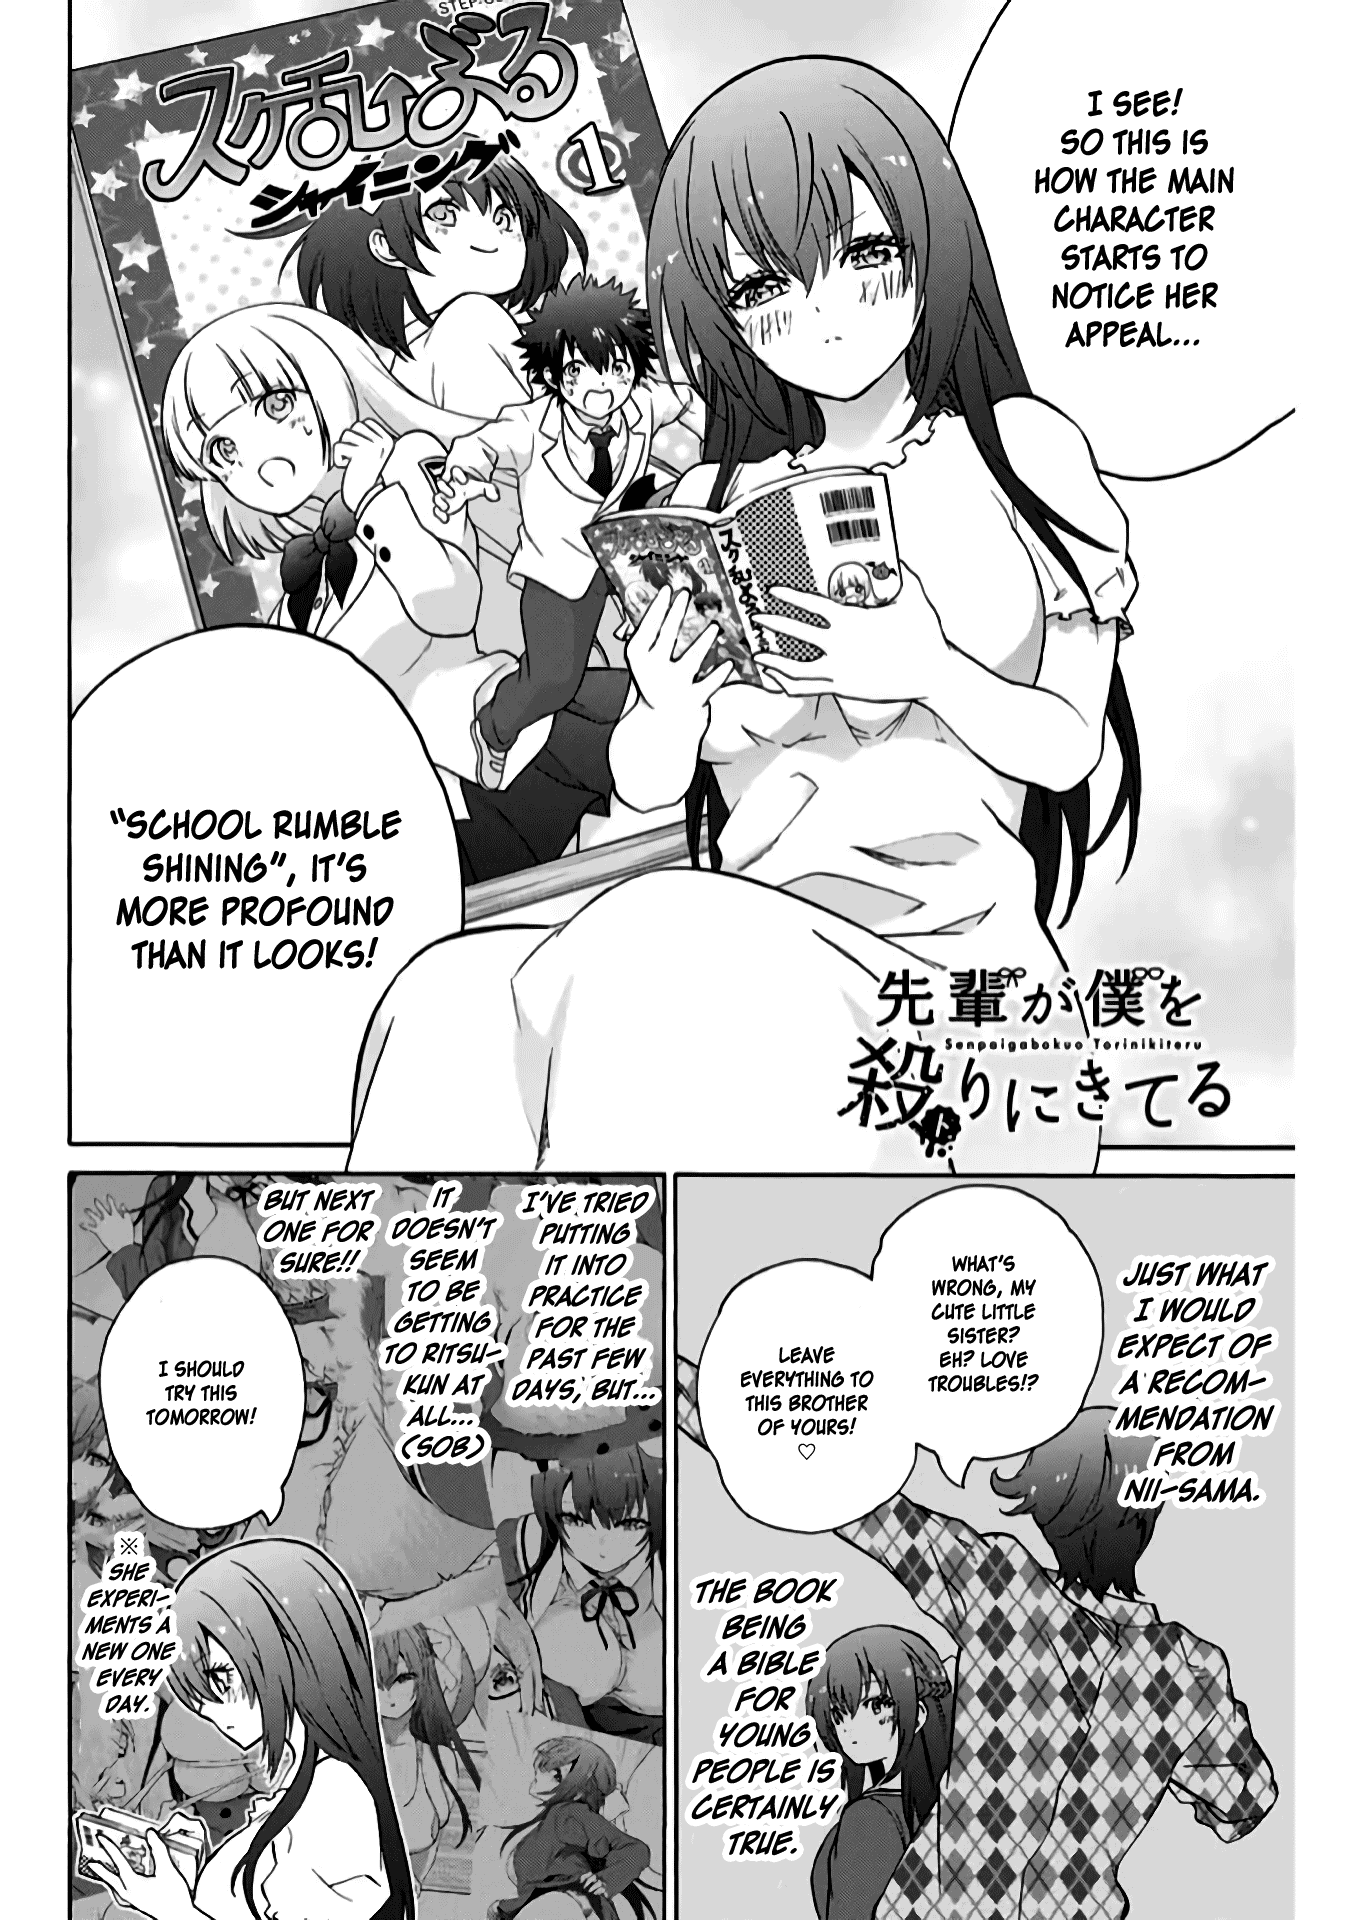 My Senpai Is After My Life - chapter 6.5 - #2